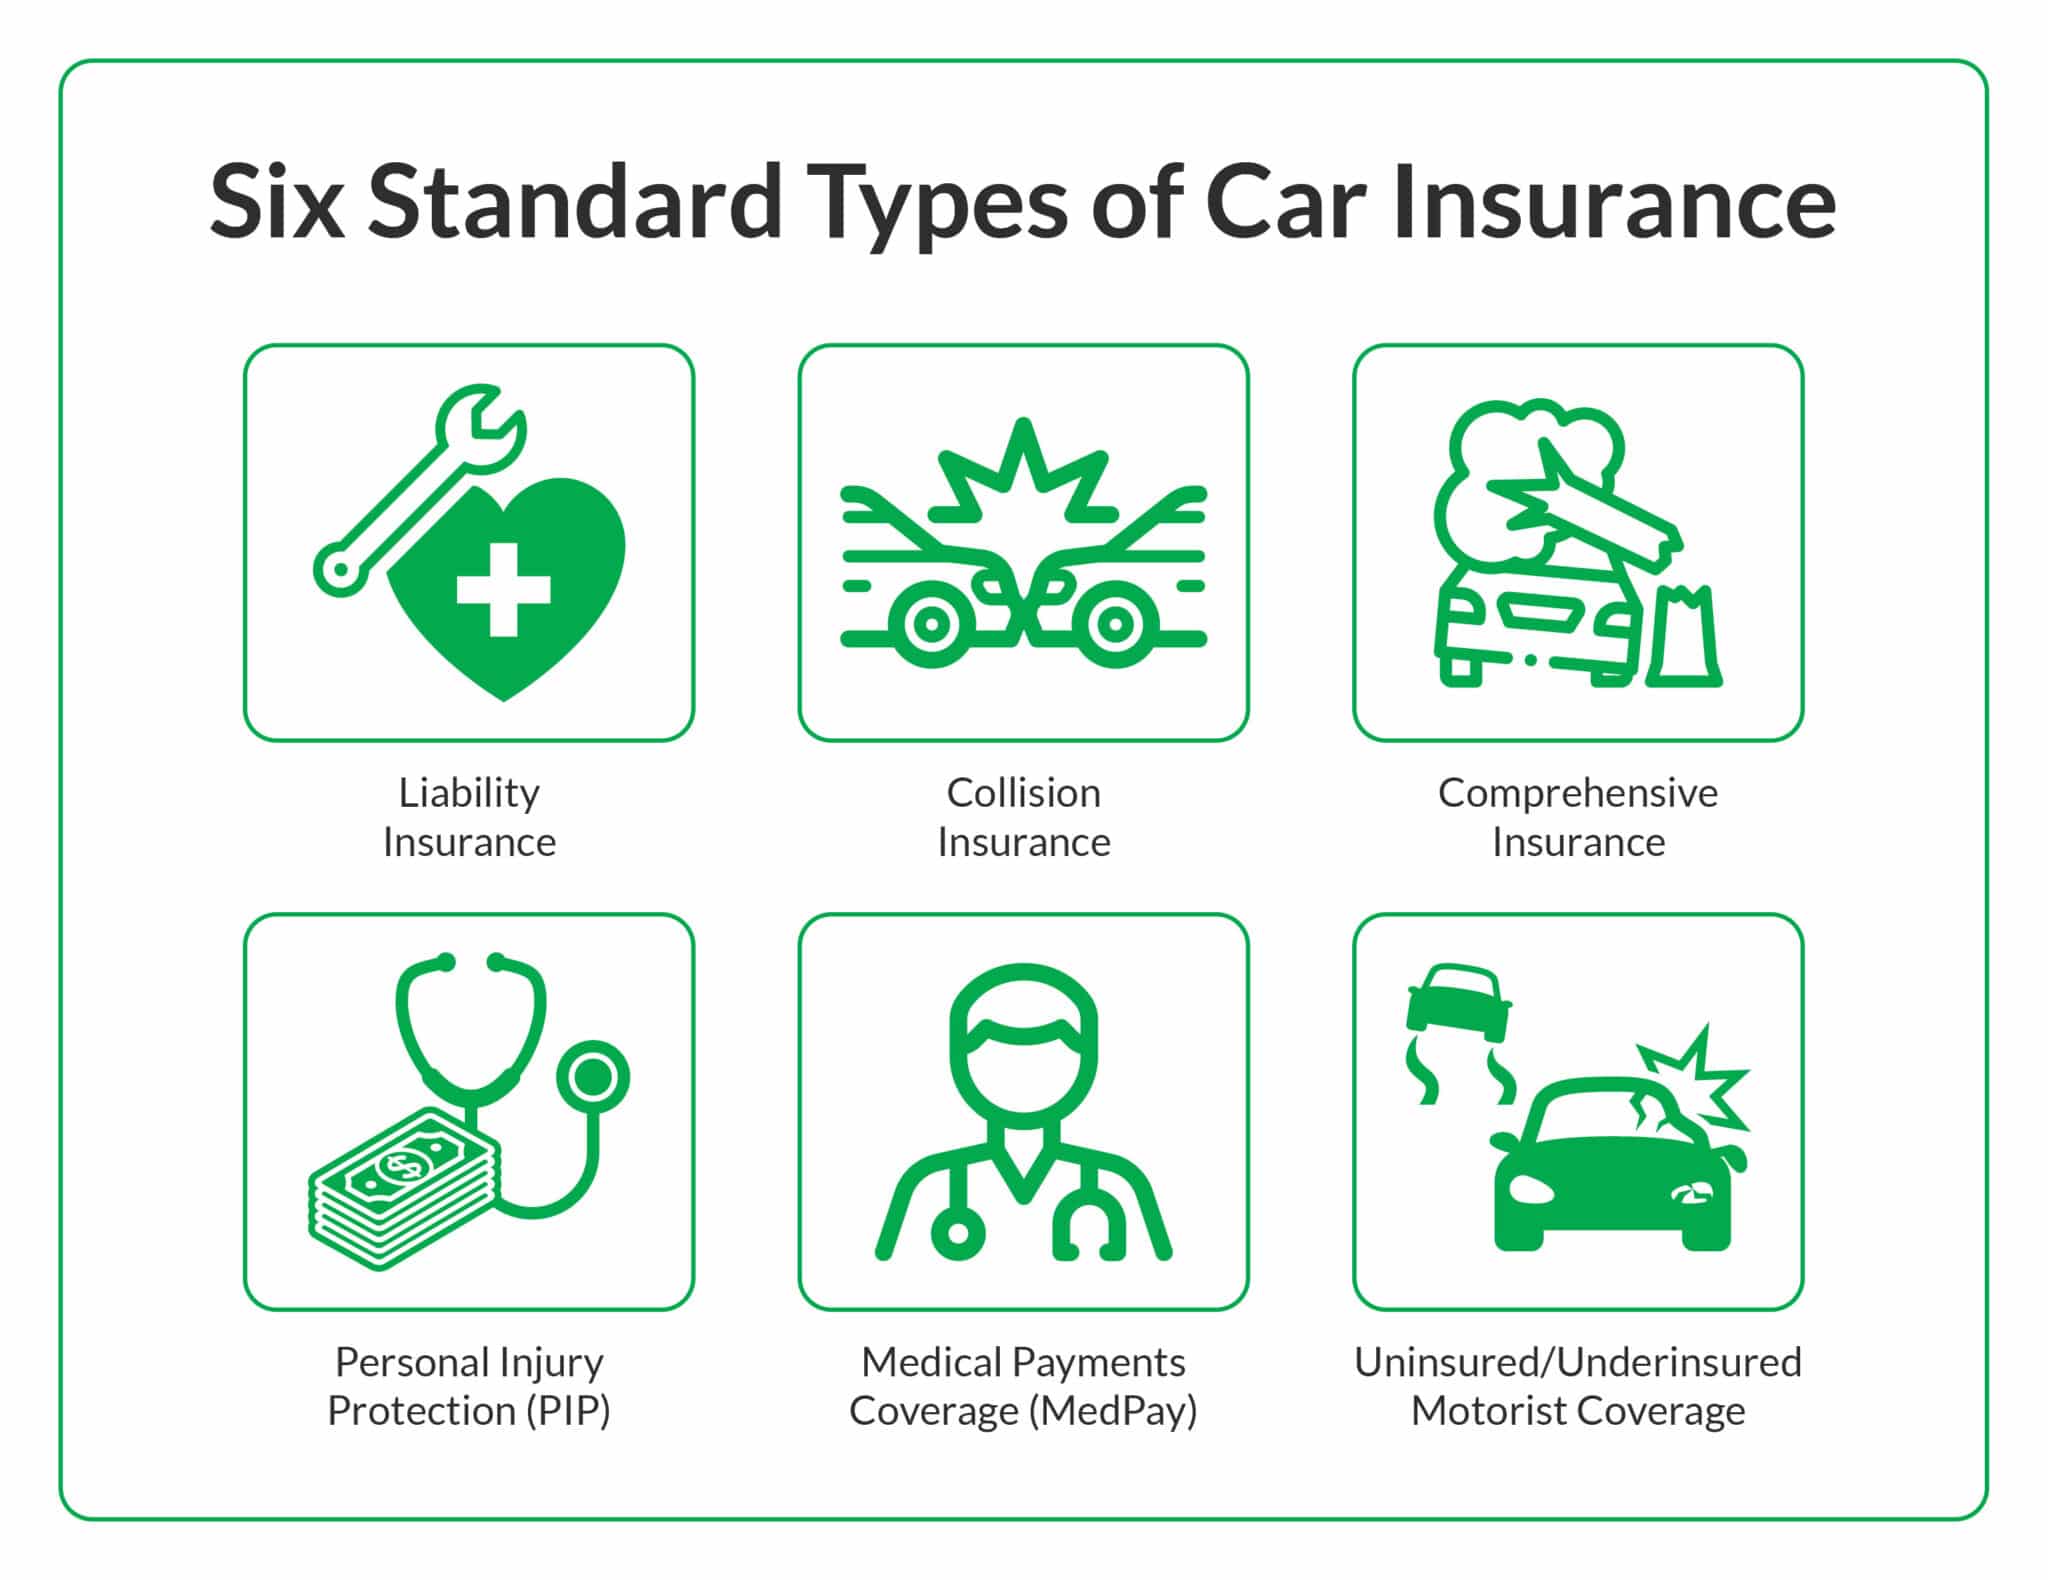 The six standard types of car insurance coverage that typically make up a full-coverage policy